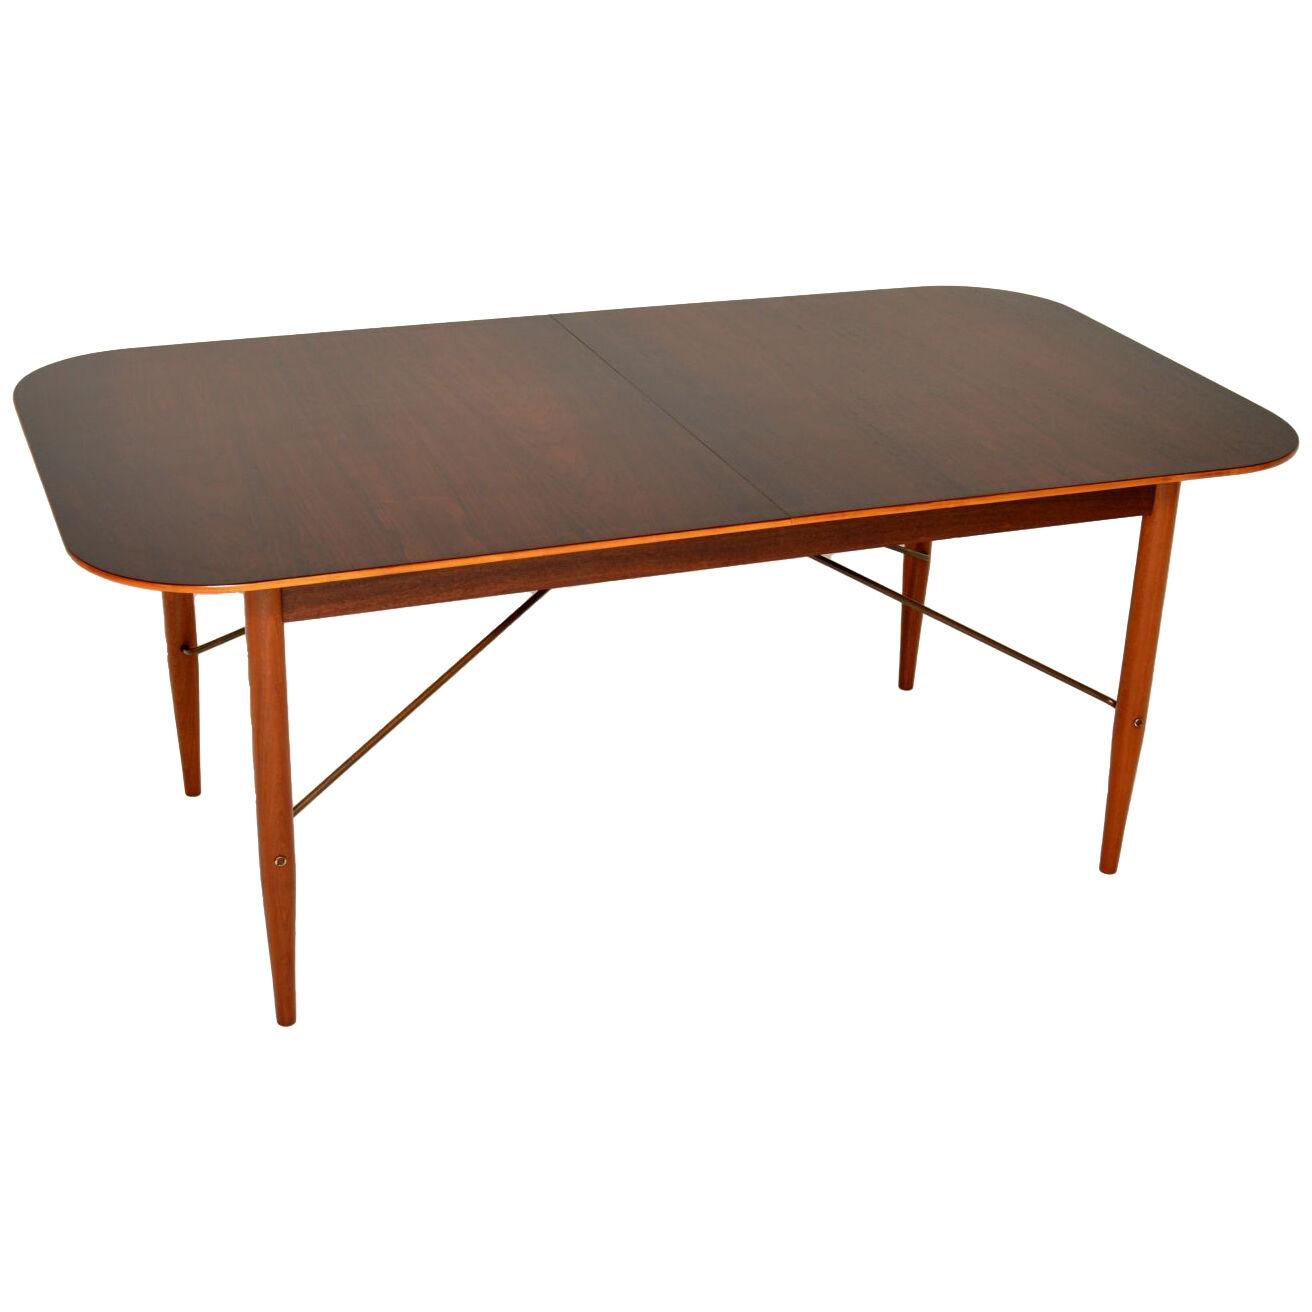 1950's Robin Day for Hille 'Albermarle' Dining Table in Rosewood